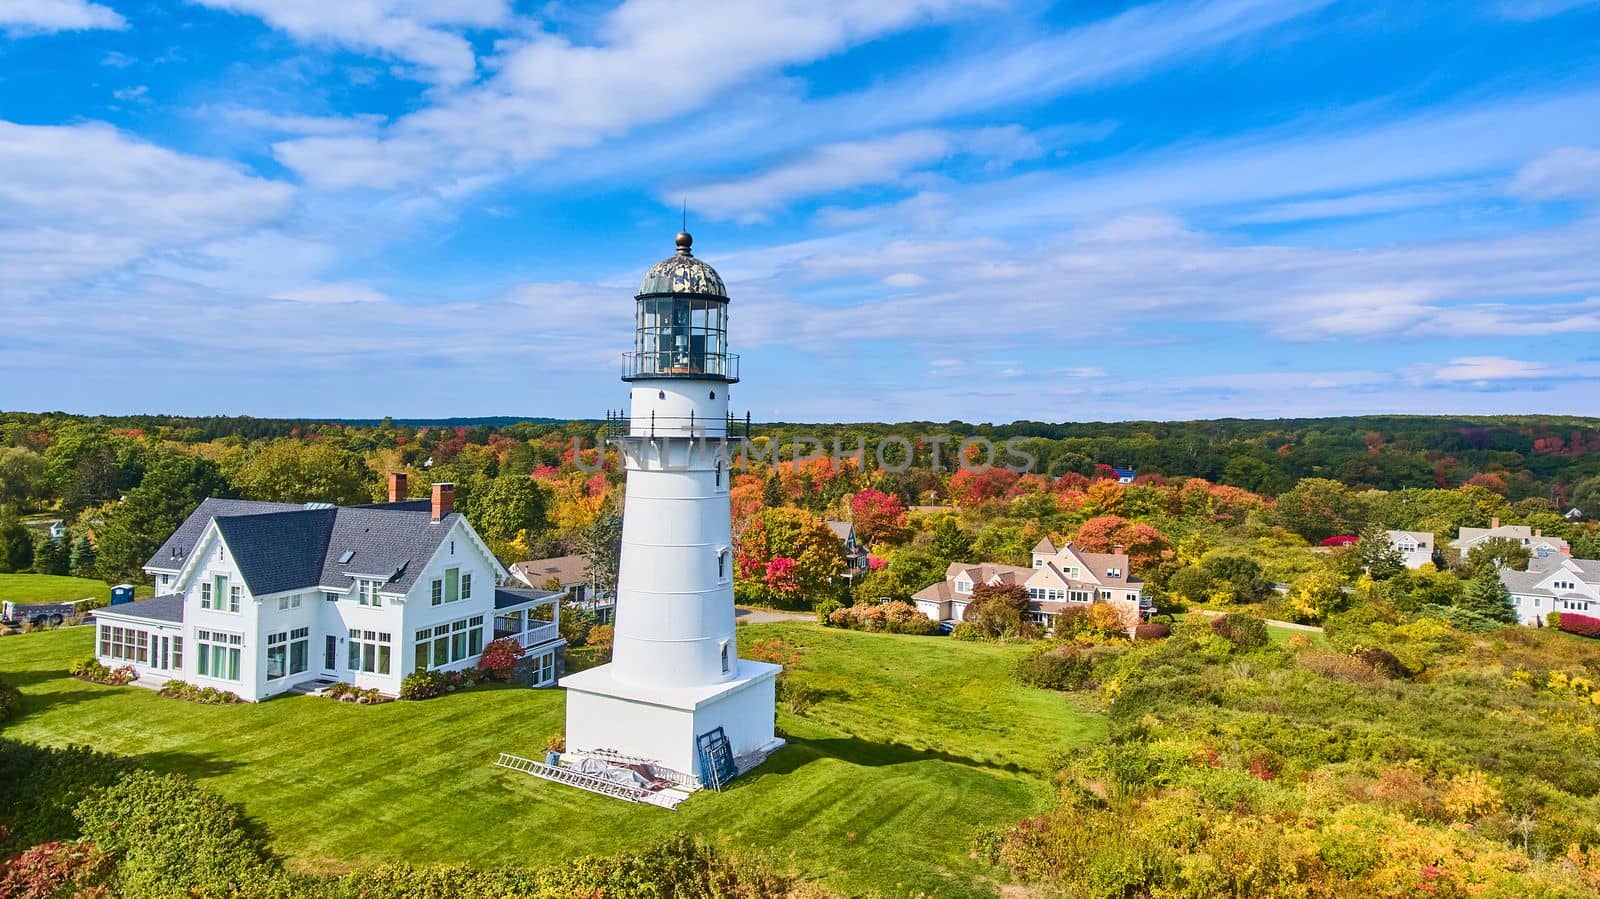 Single classic white lighthouse by homes with fall foliage around by njproductions